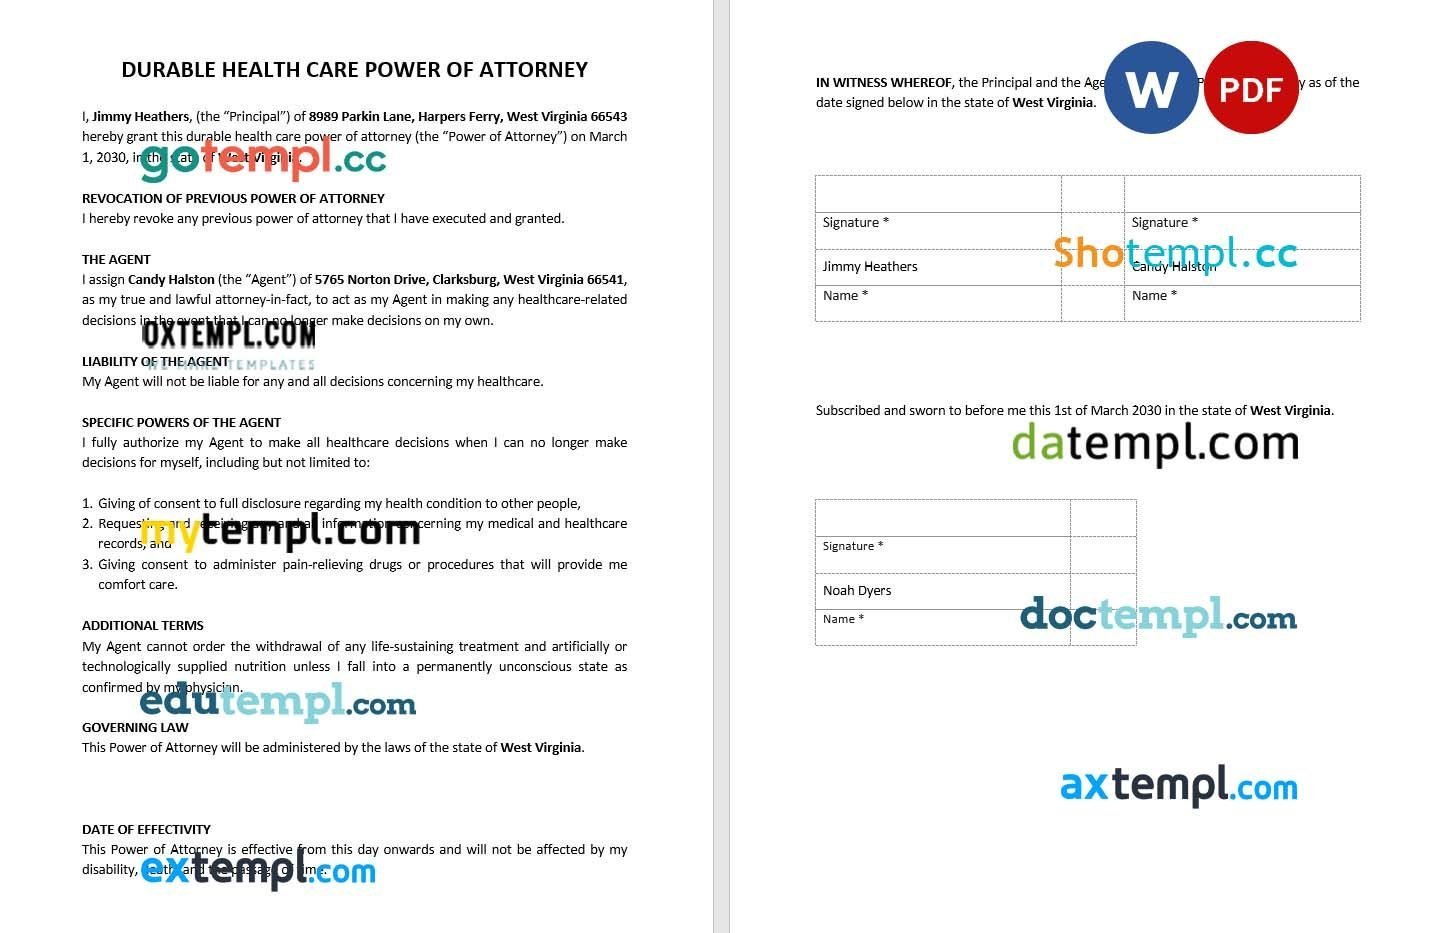 Durable Health Care Power of Attorney example, fully editable